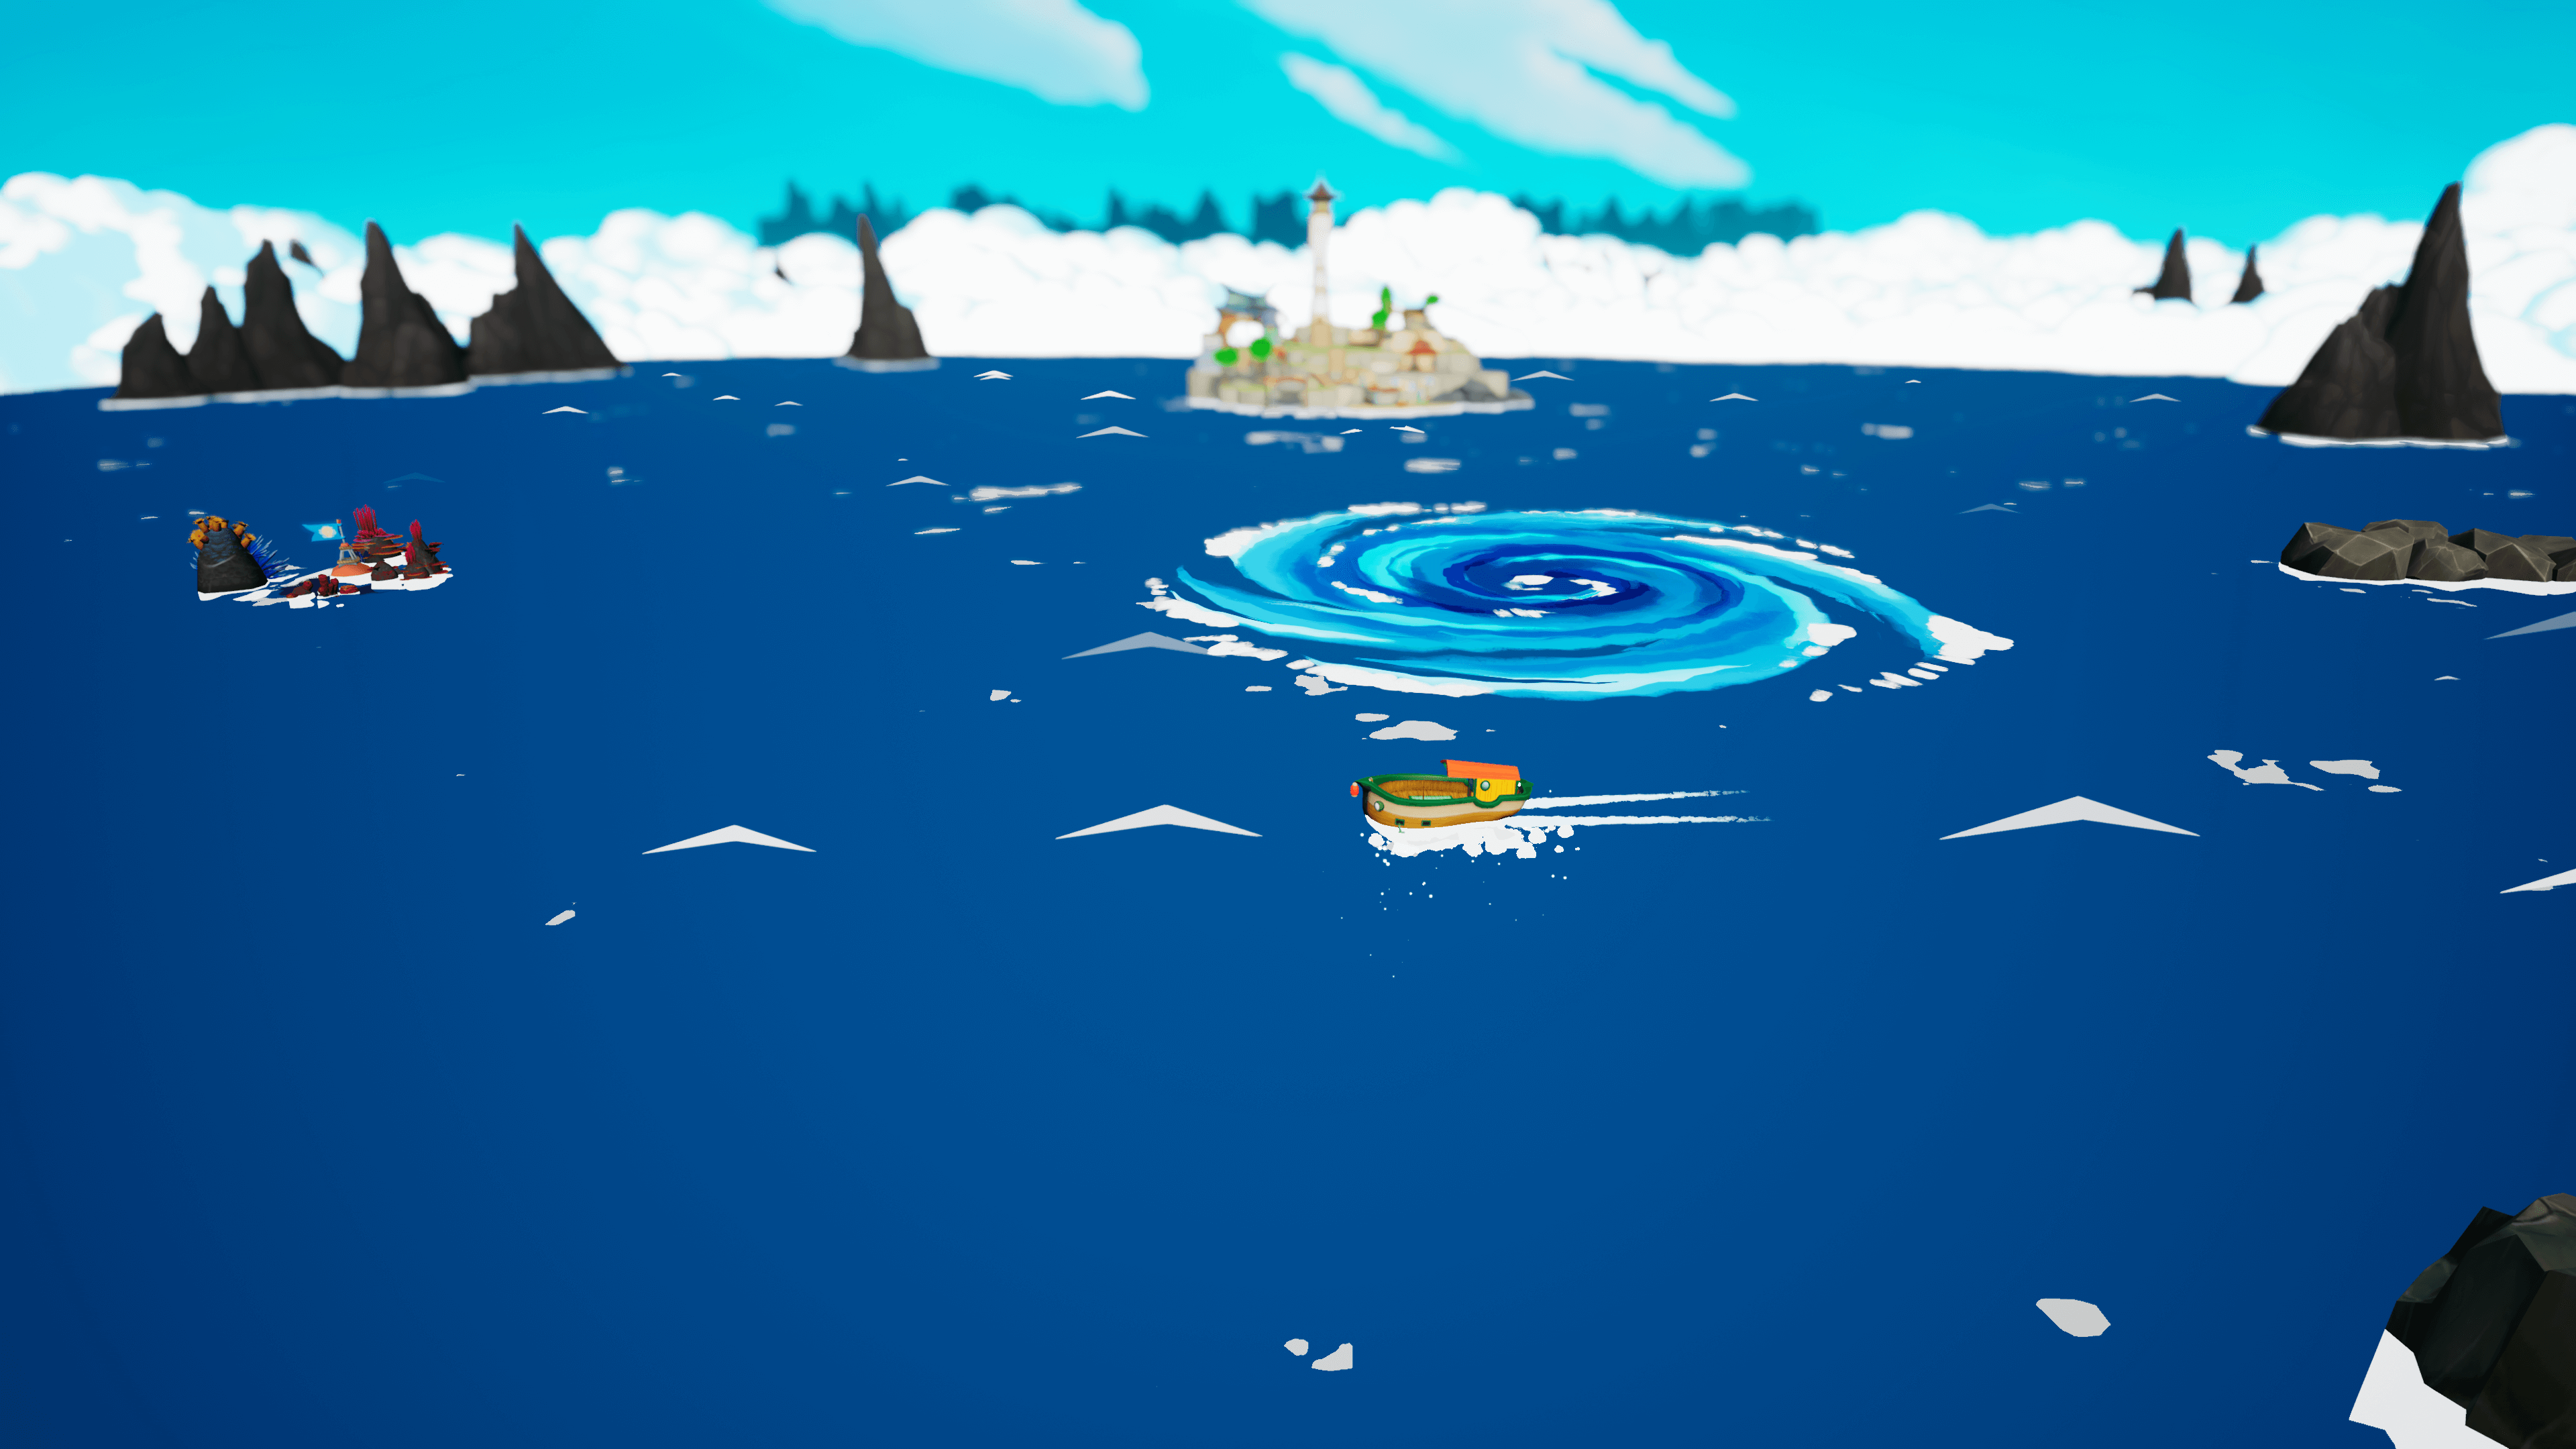 Screenshot of Koa exploring the sea in her boat, which she uses to travel between islands. A Whirlpool can be seen just a short distance from Koa and her boat.